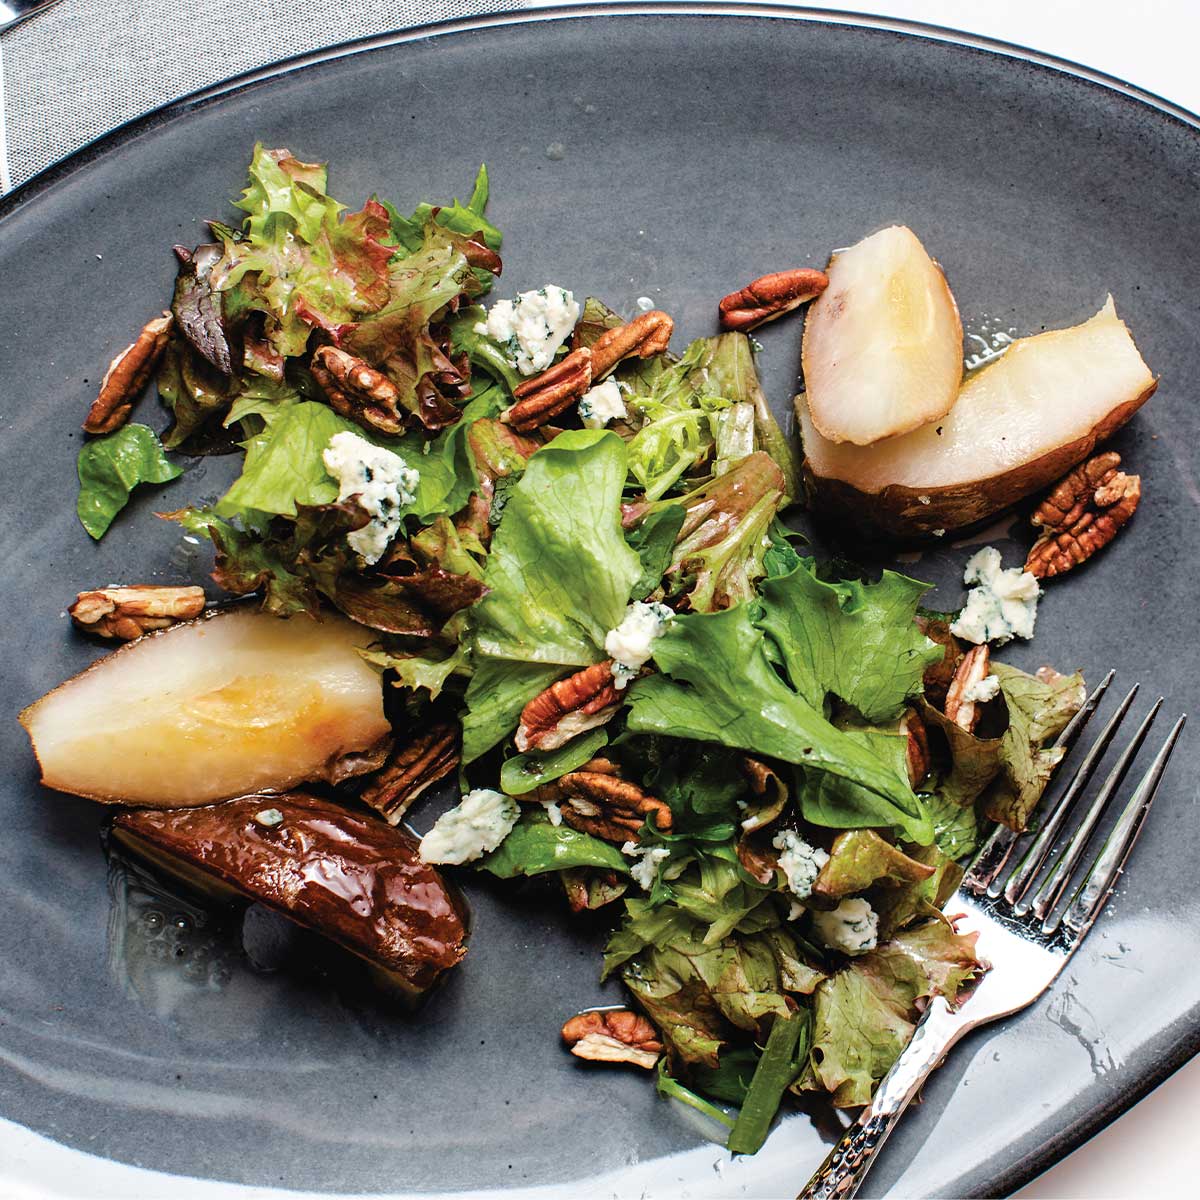 Old Gilman Grill's Honey Roasted Pear Salad with Blue Cheese and White Balsamic Vinaigrette